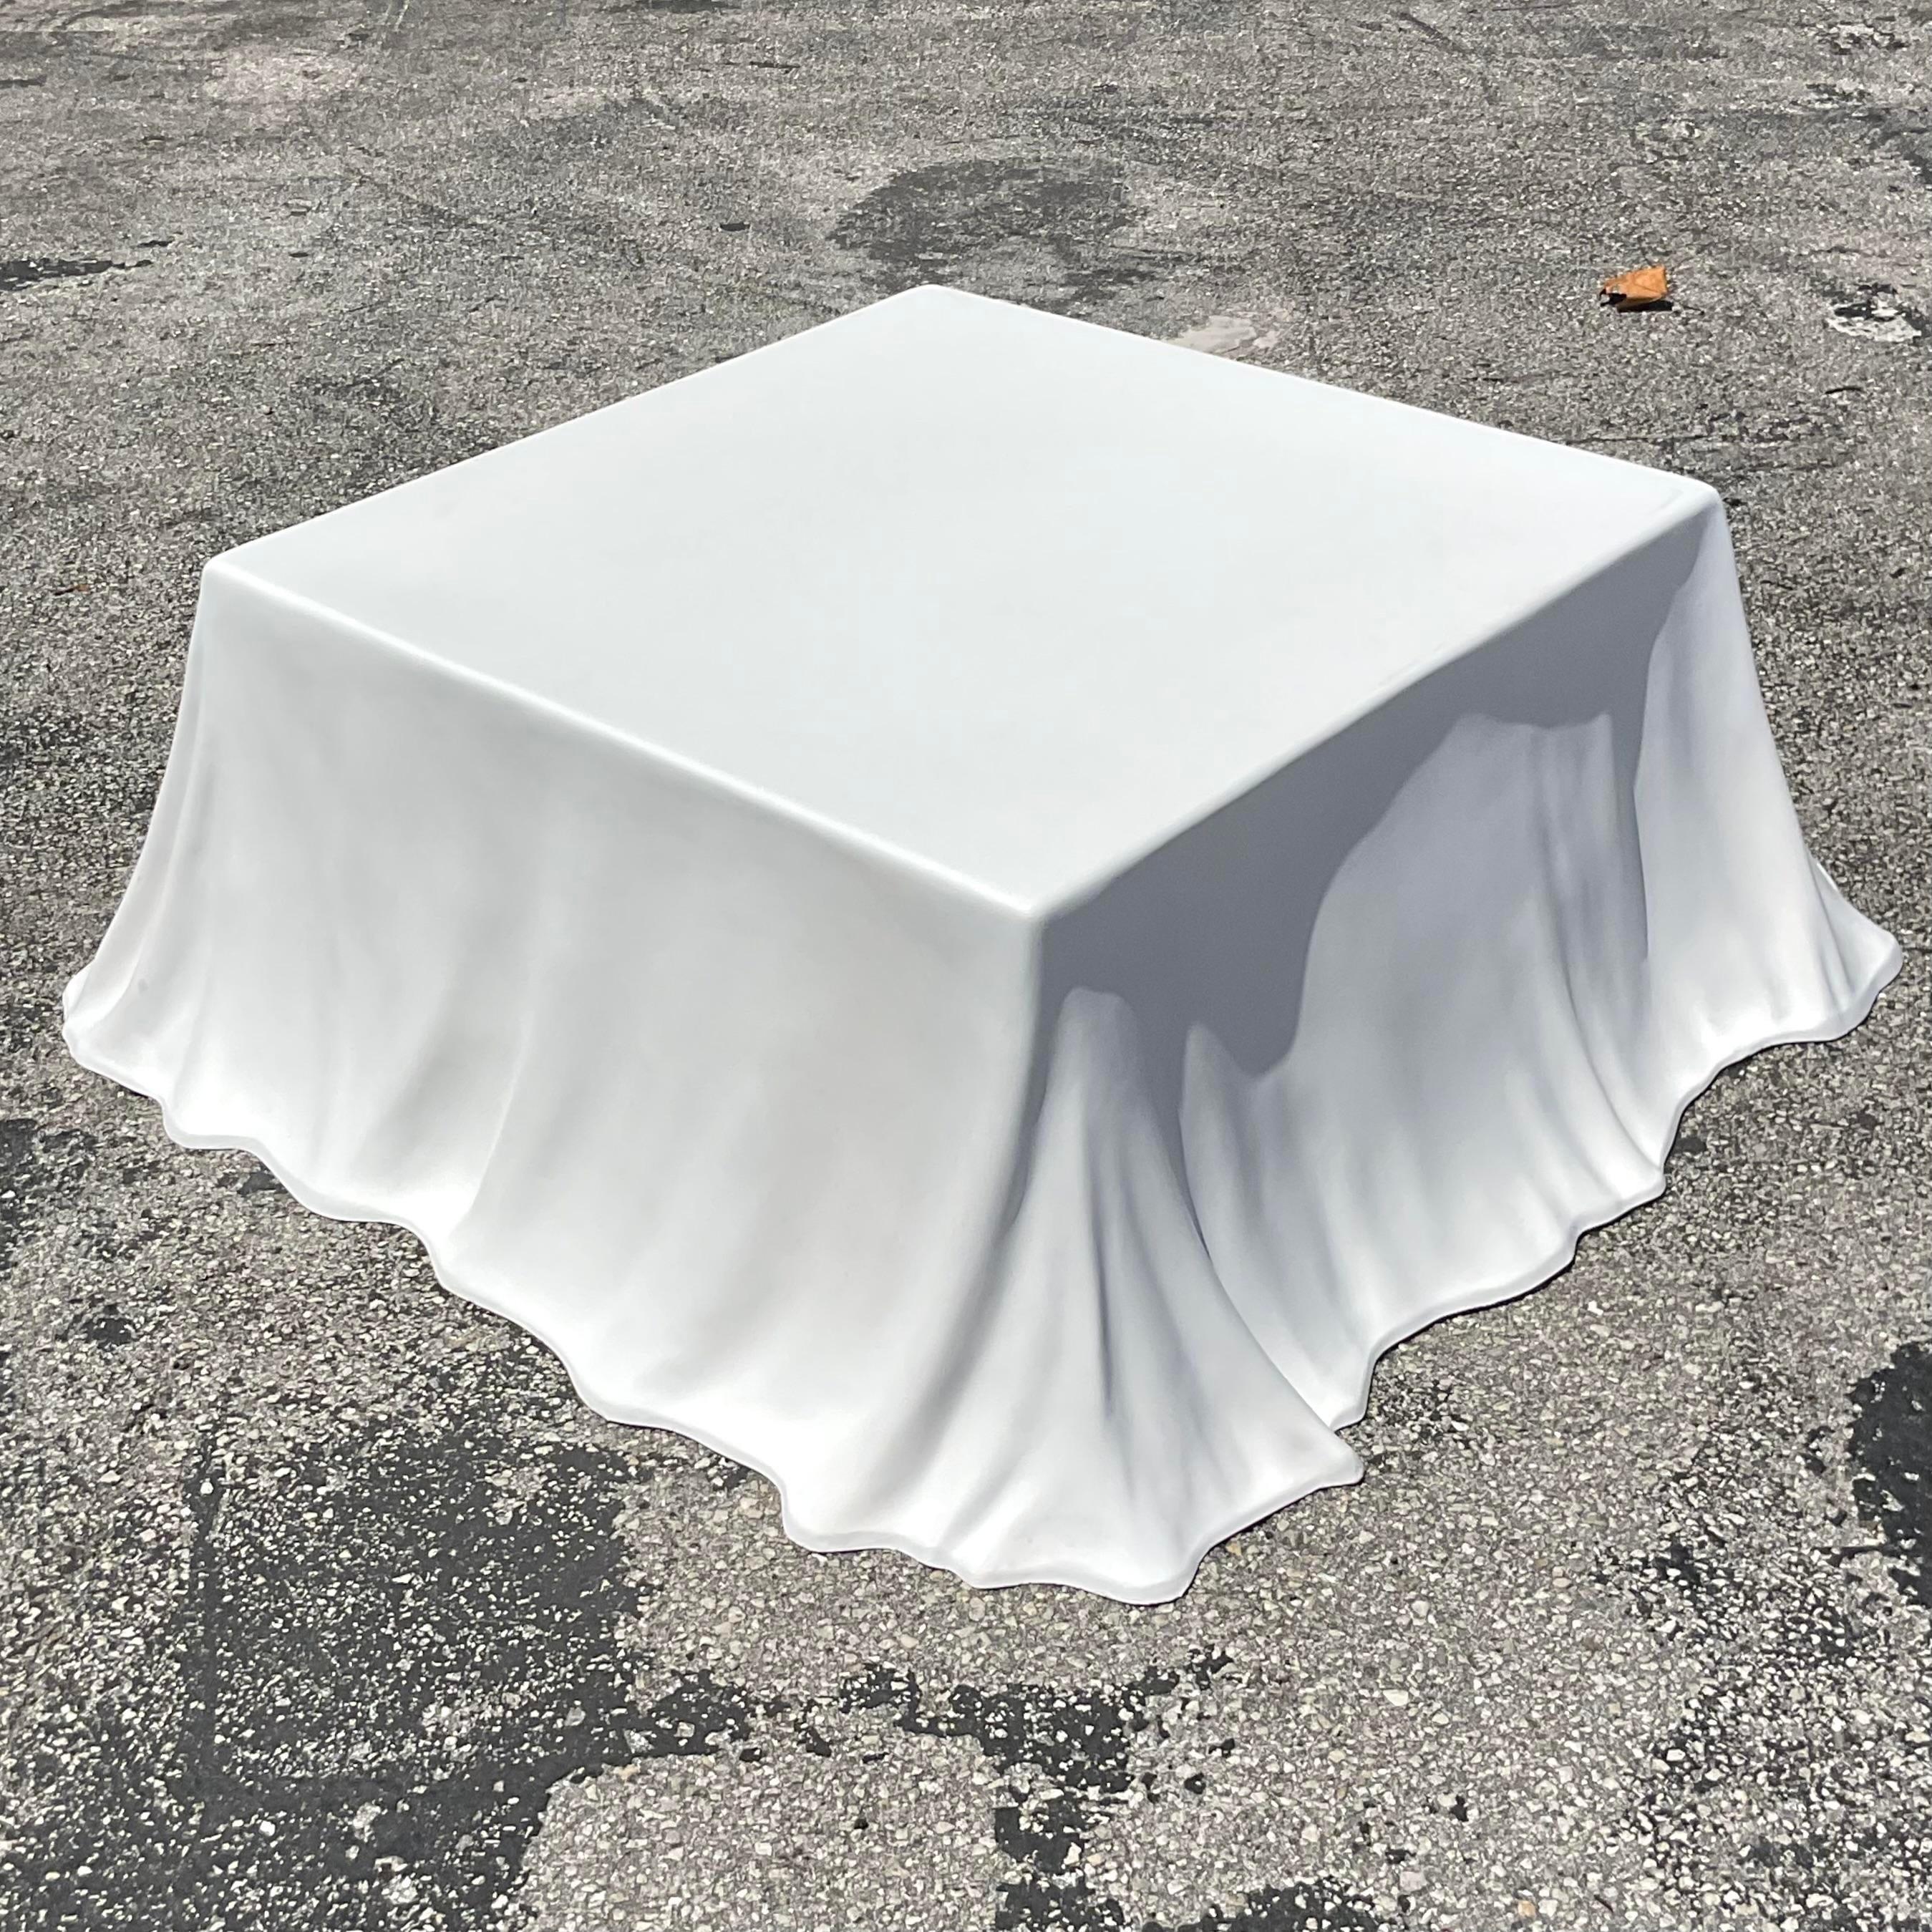 Mid 20th Century Vintage Regency Molded Fiberglass “Tovaglia” Coffee Table  In Good Condition For Sale In west palm beach, FL